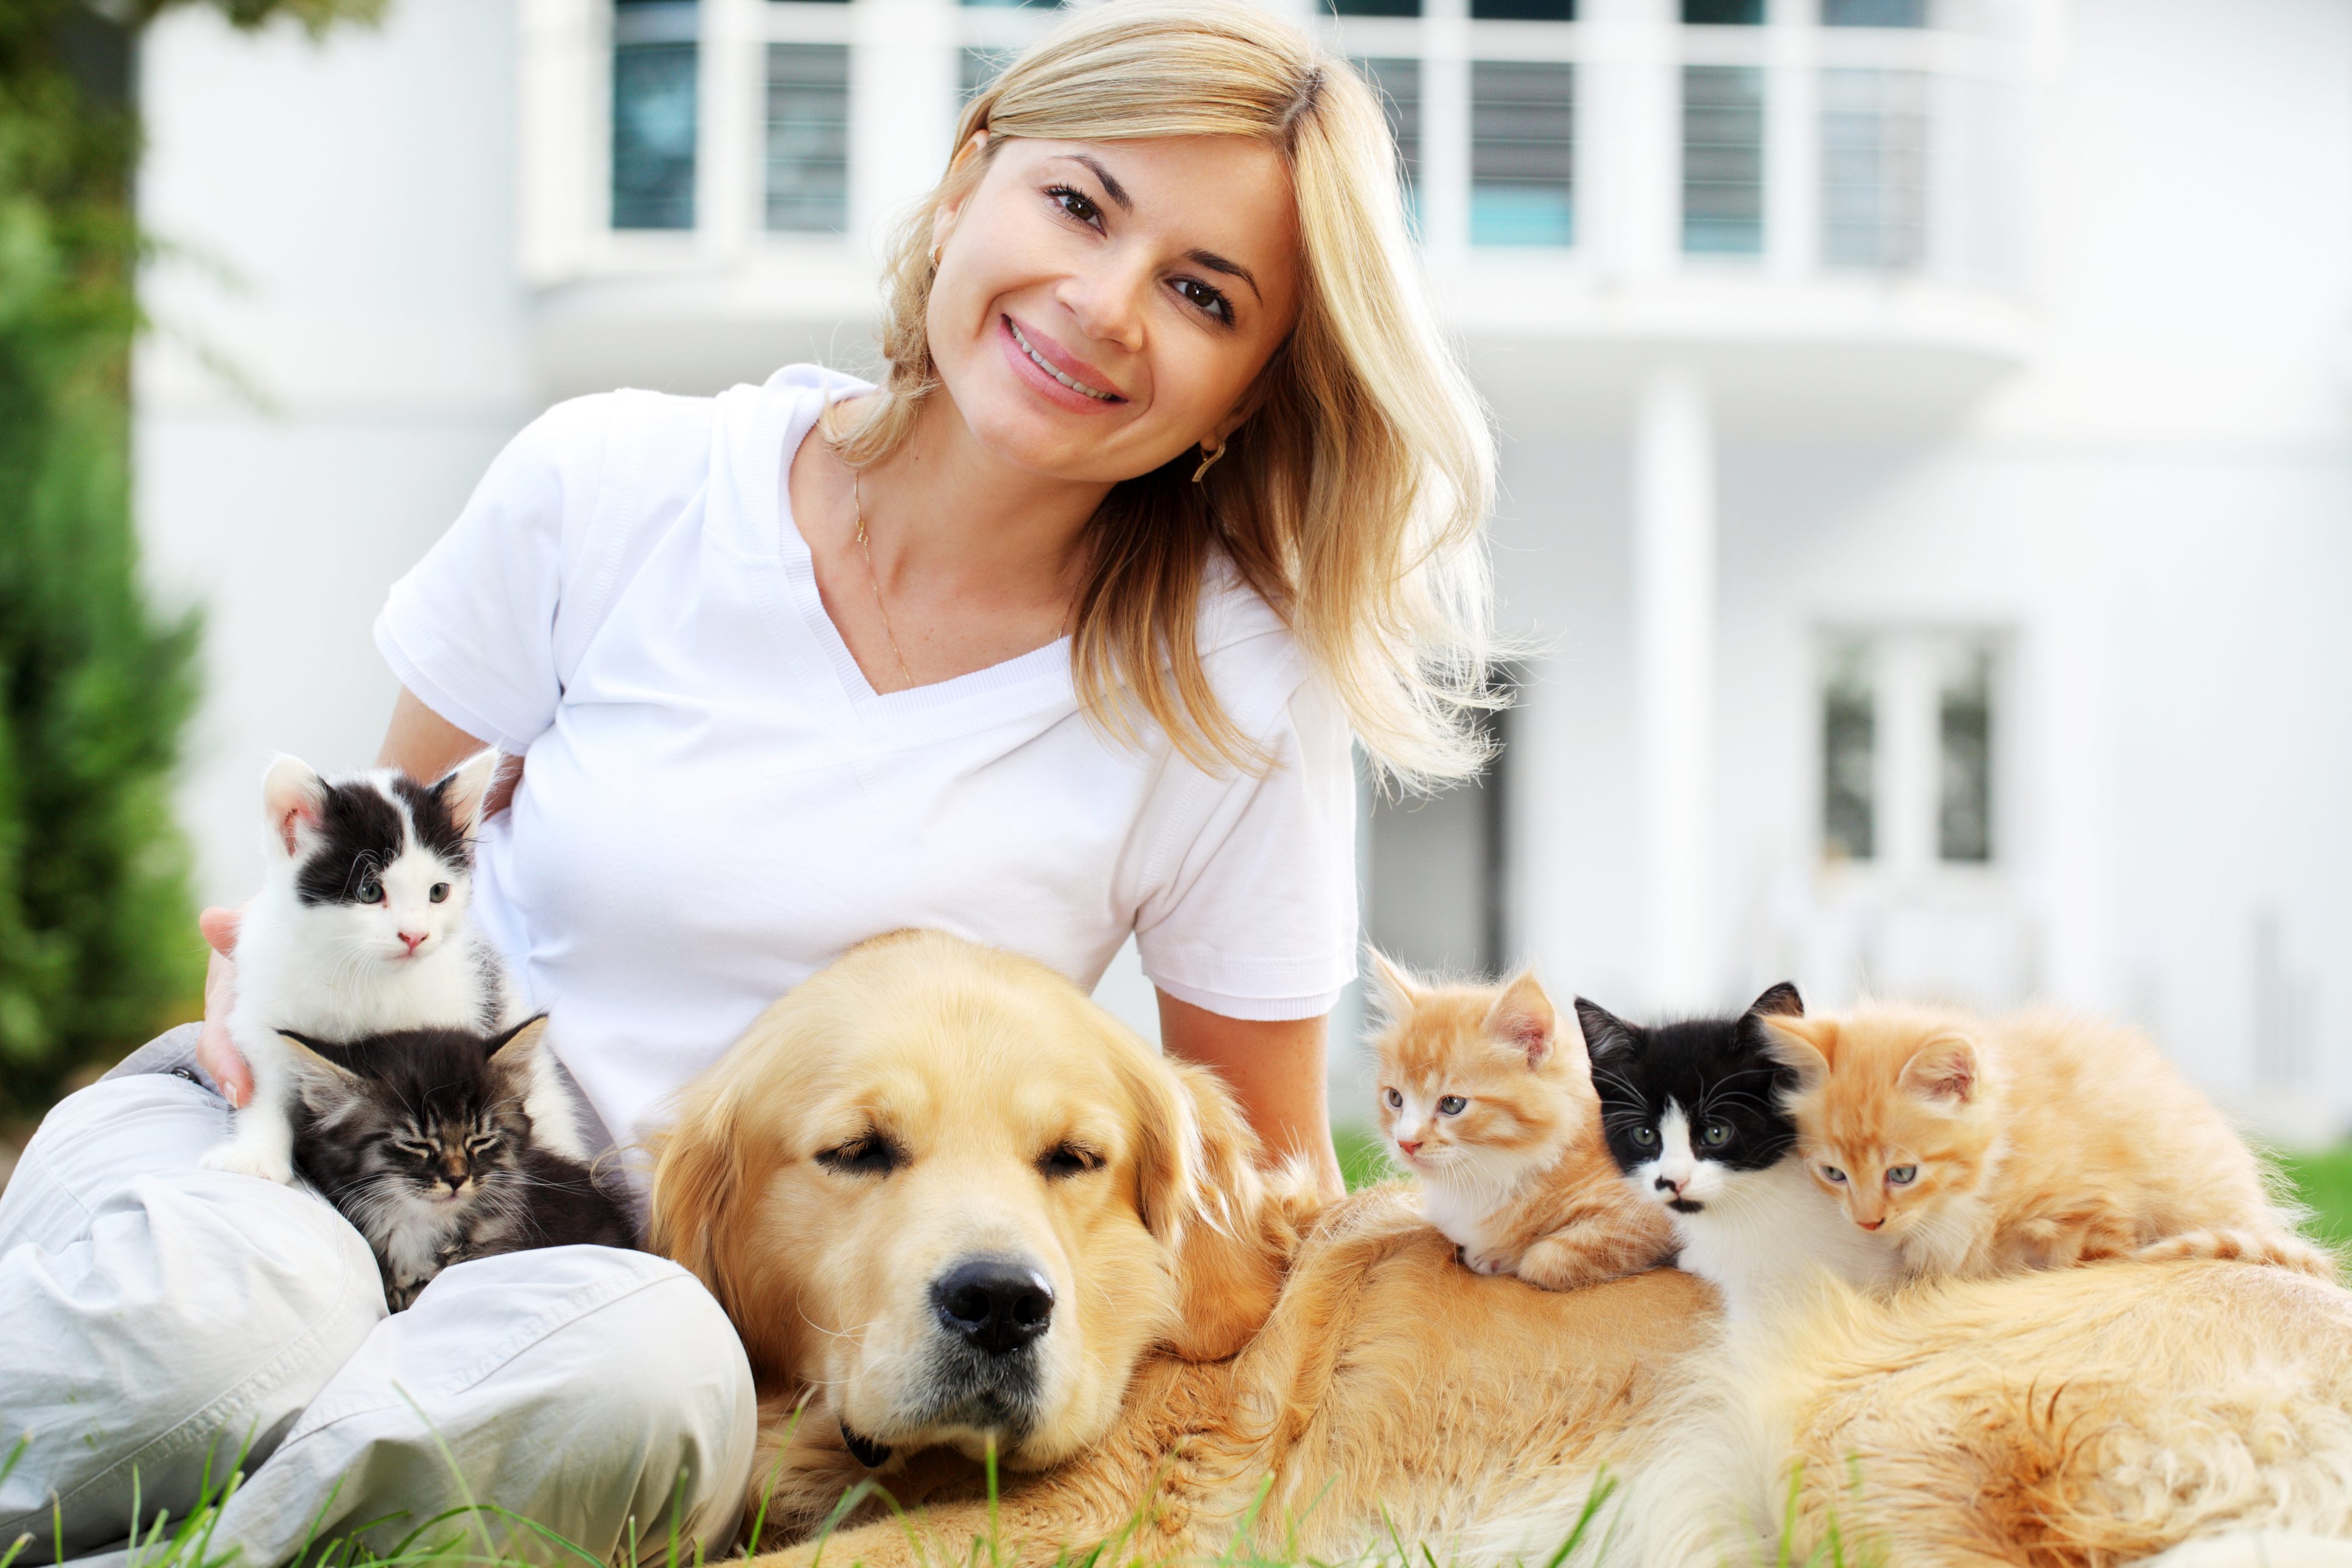 Online Dating: How Many Pets Is Too Many?